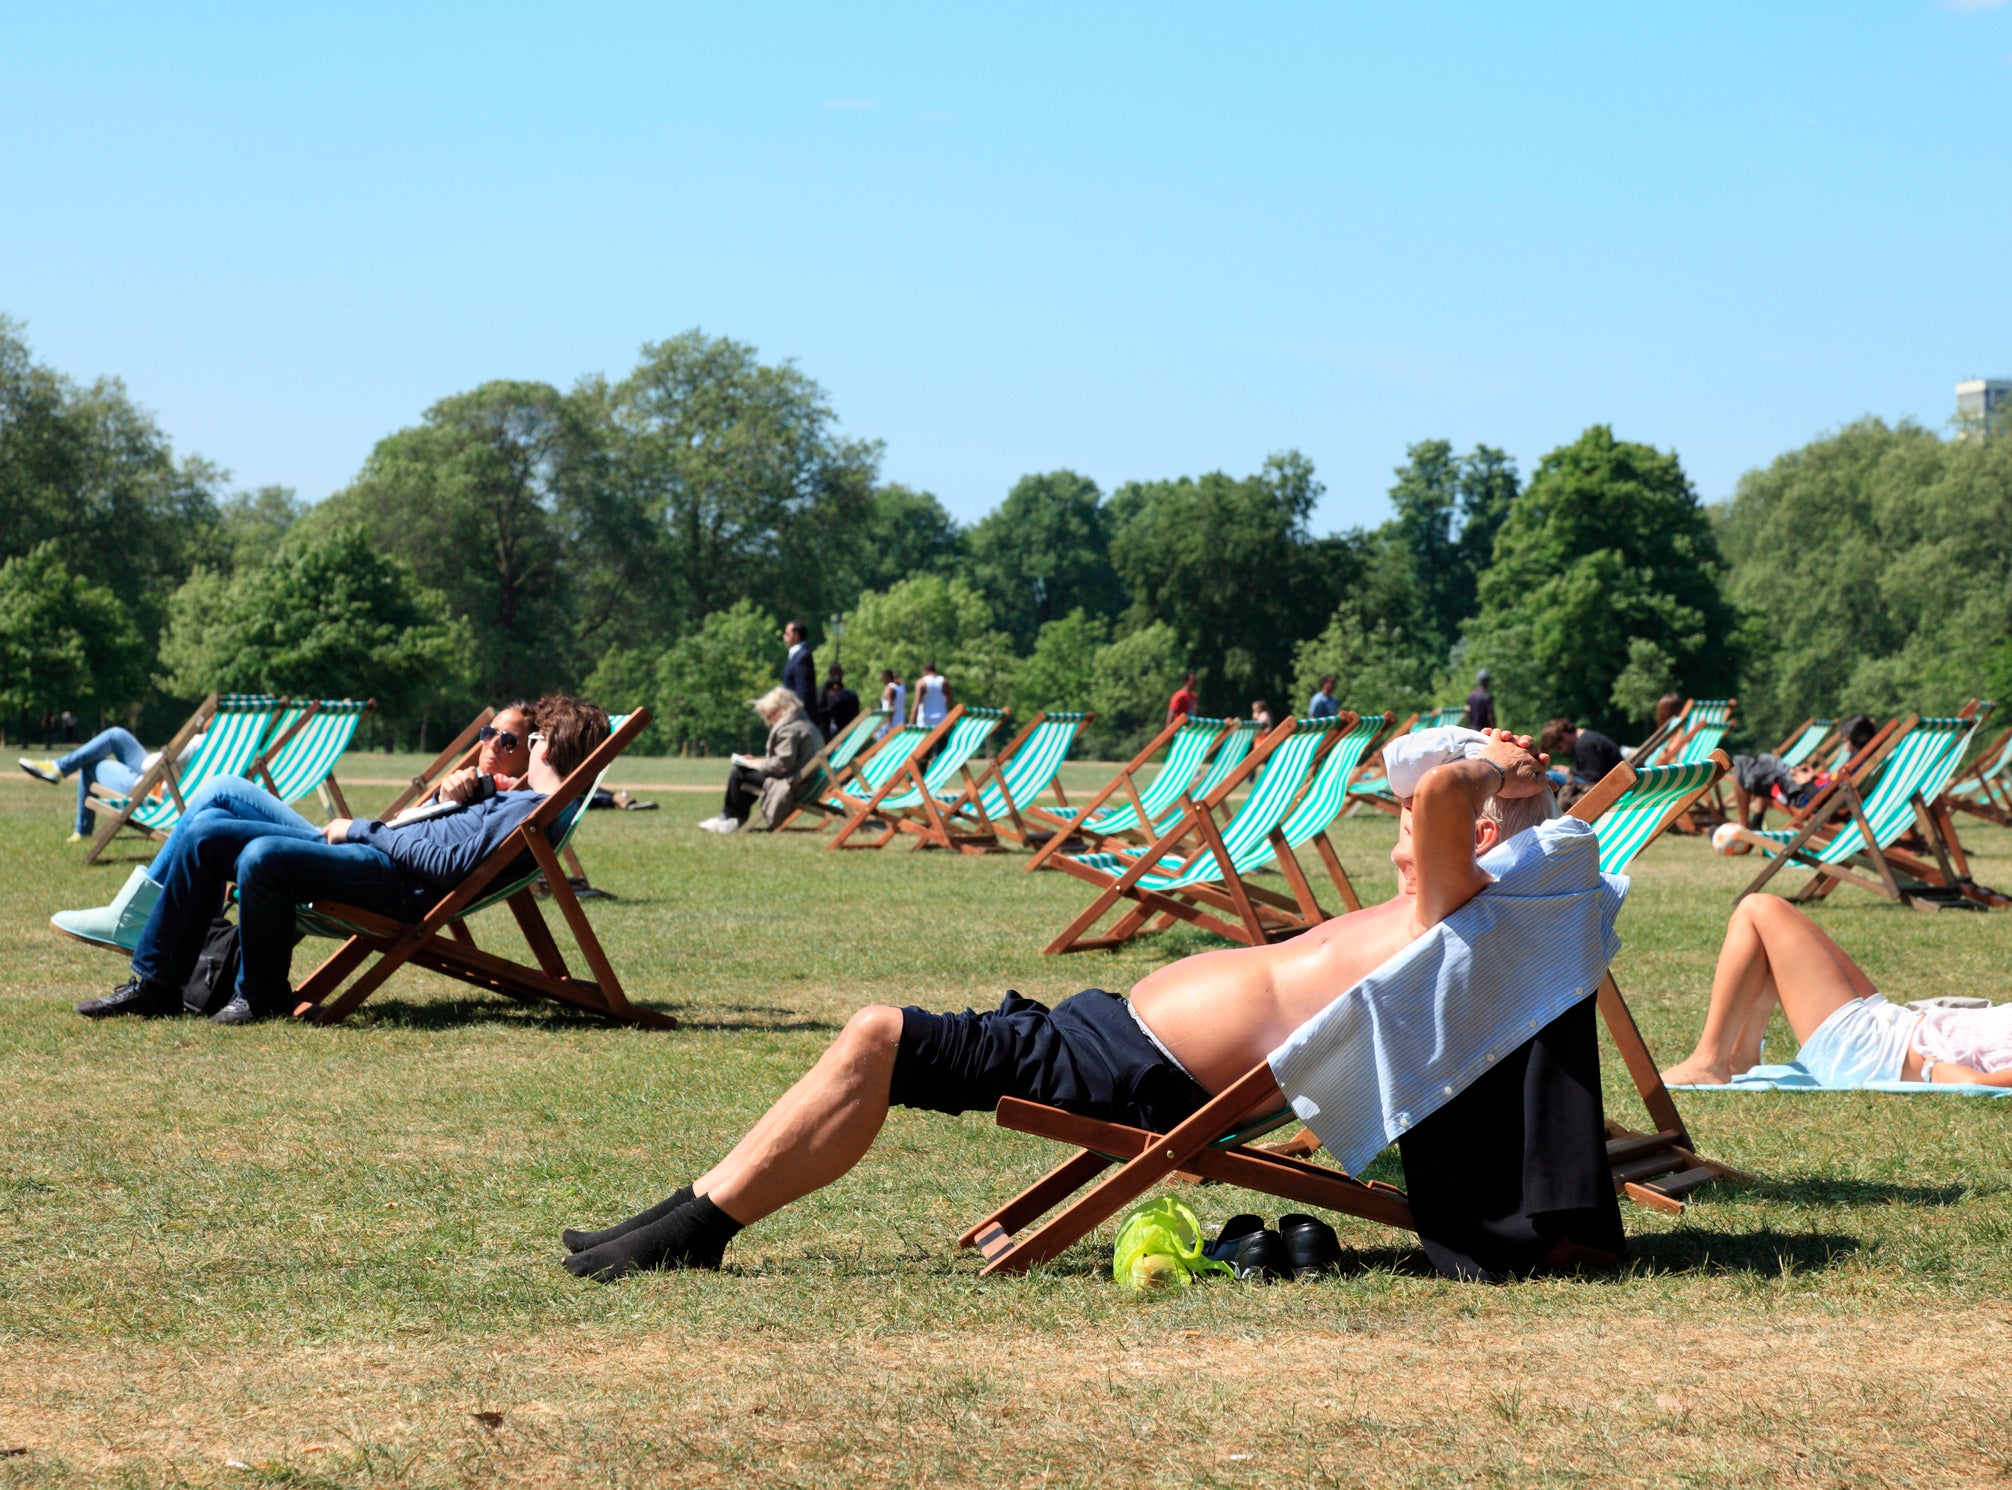 Britons can finally expect a stretch of sunny warm weather next week, with the Met Office forecasting above average temperatures and “very warm” days